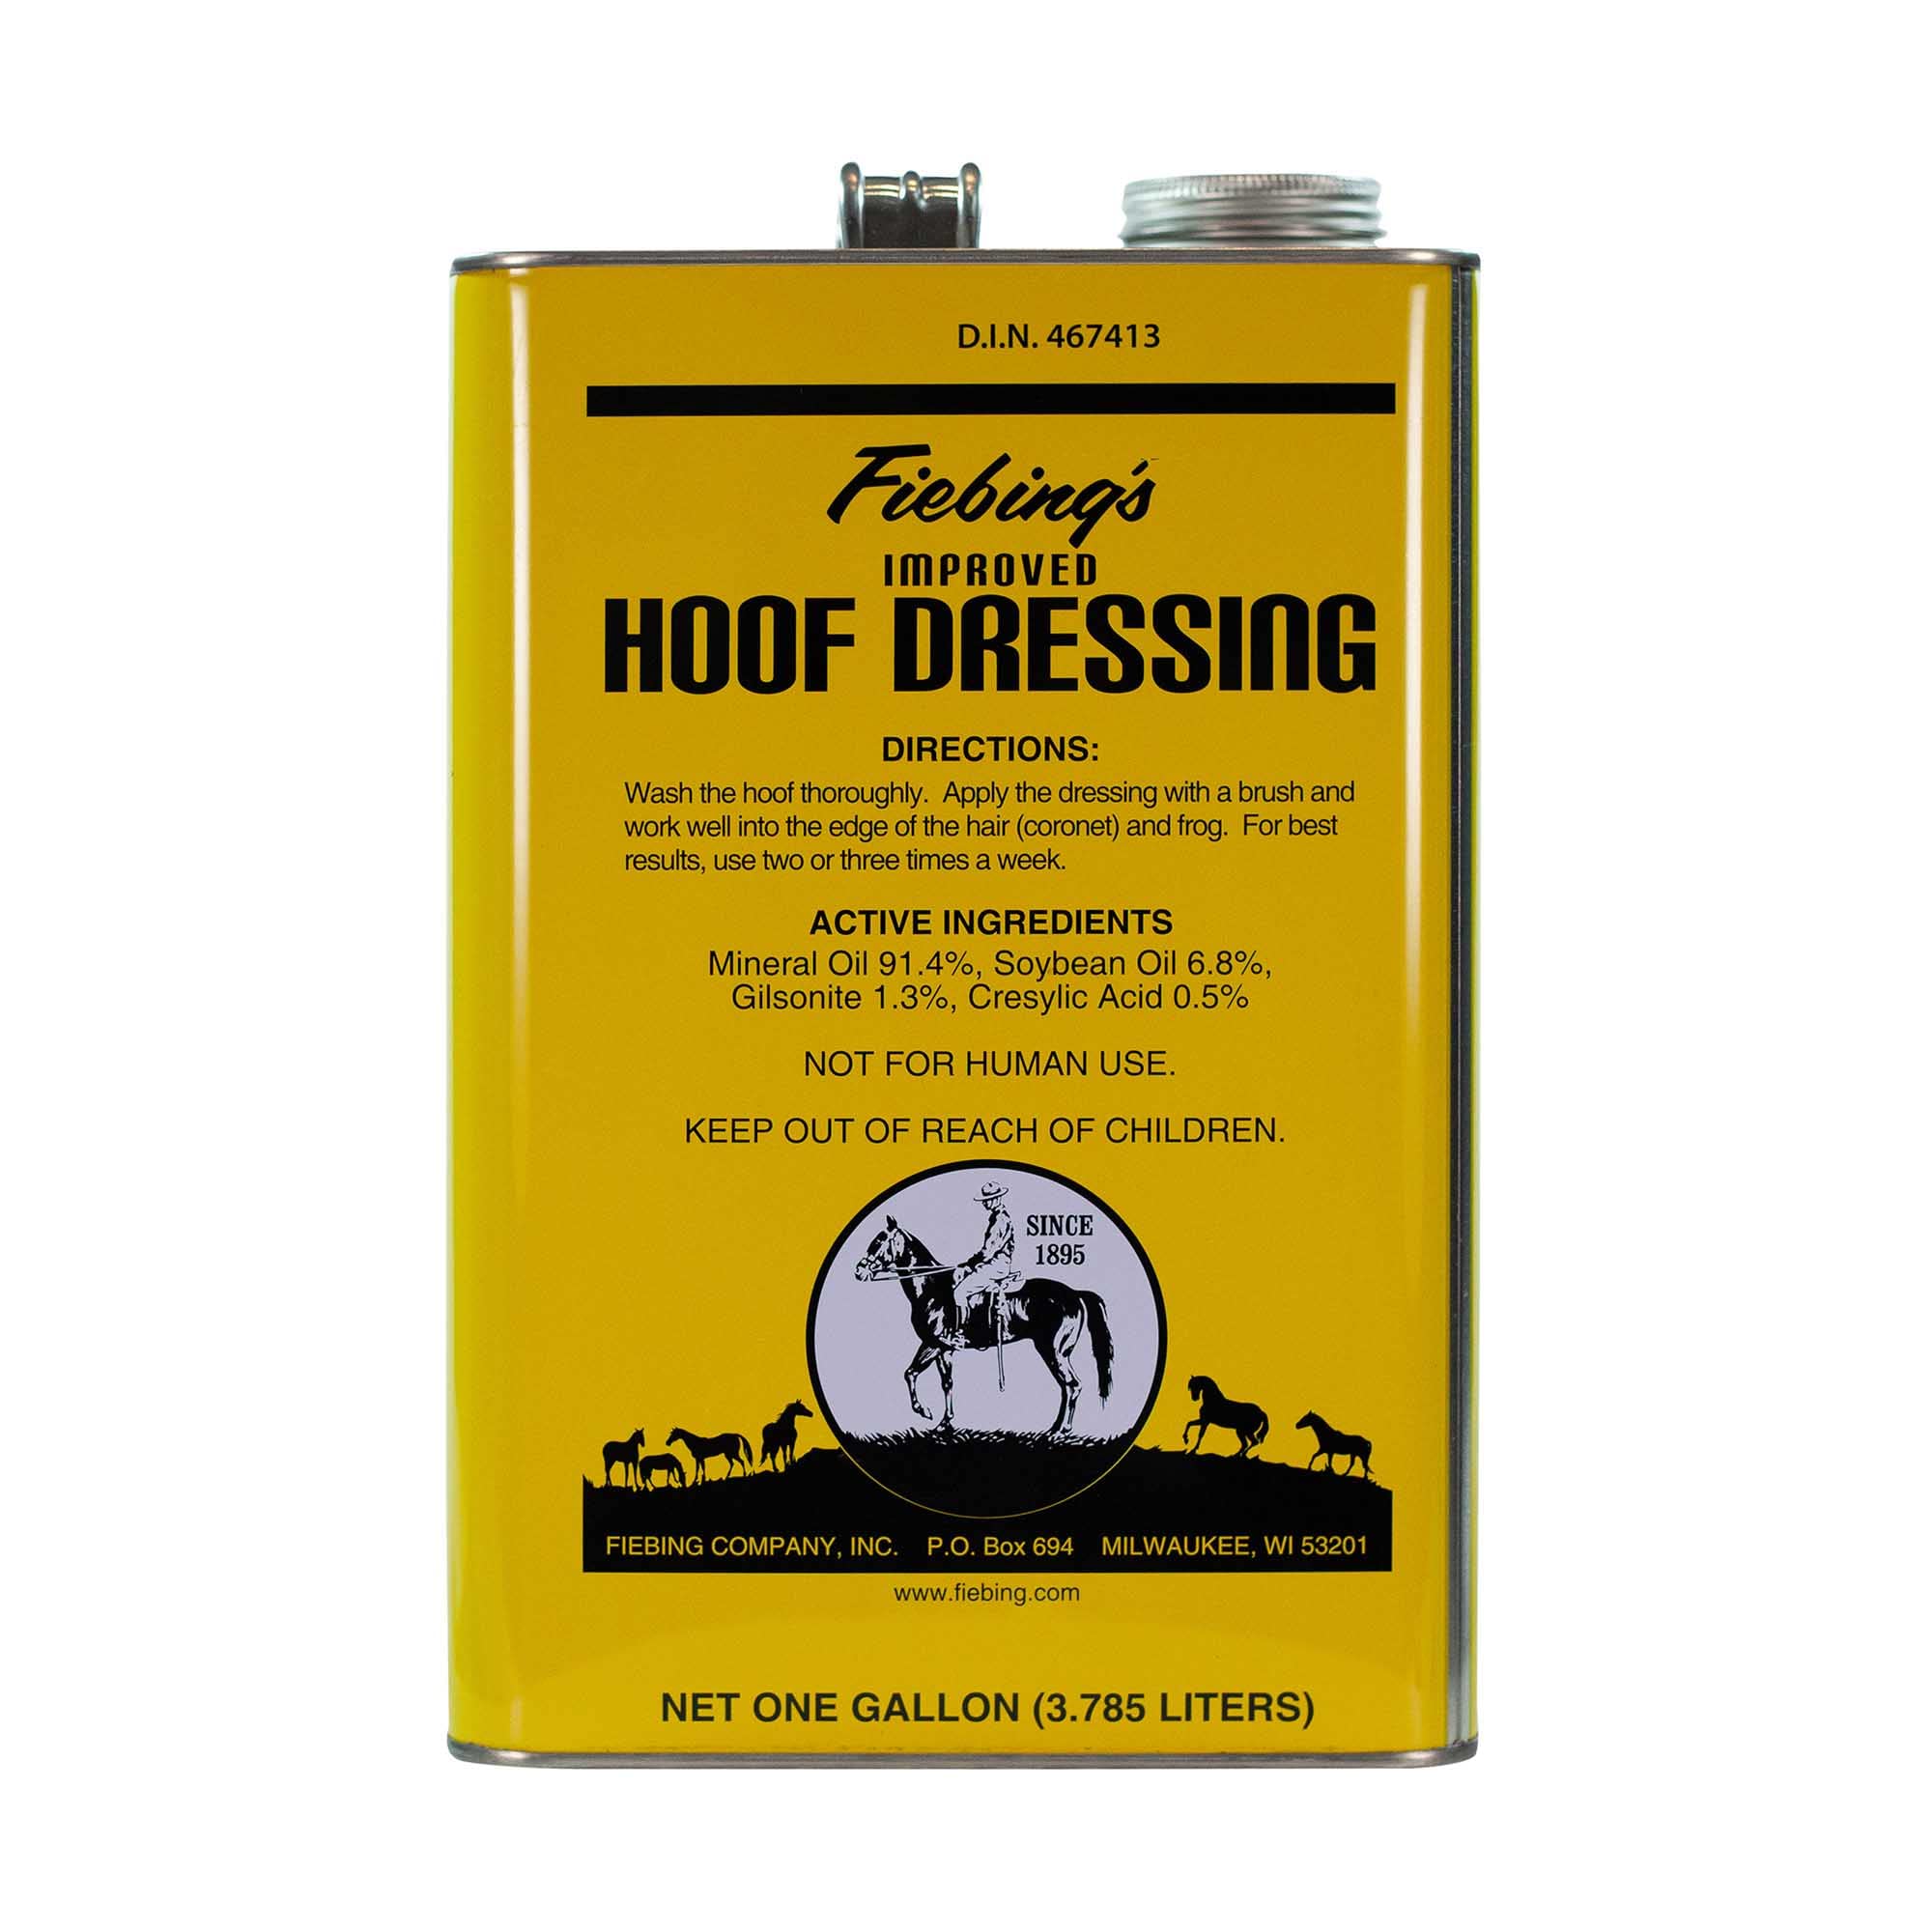 Fiebing's Hoof Dressing 1 Gallon - Helps Maintain Healthy Horse Hooves and Feet